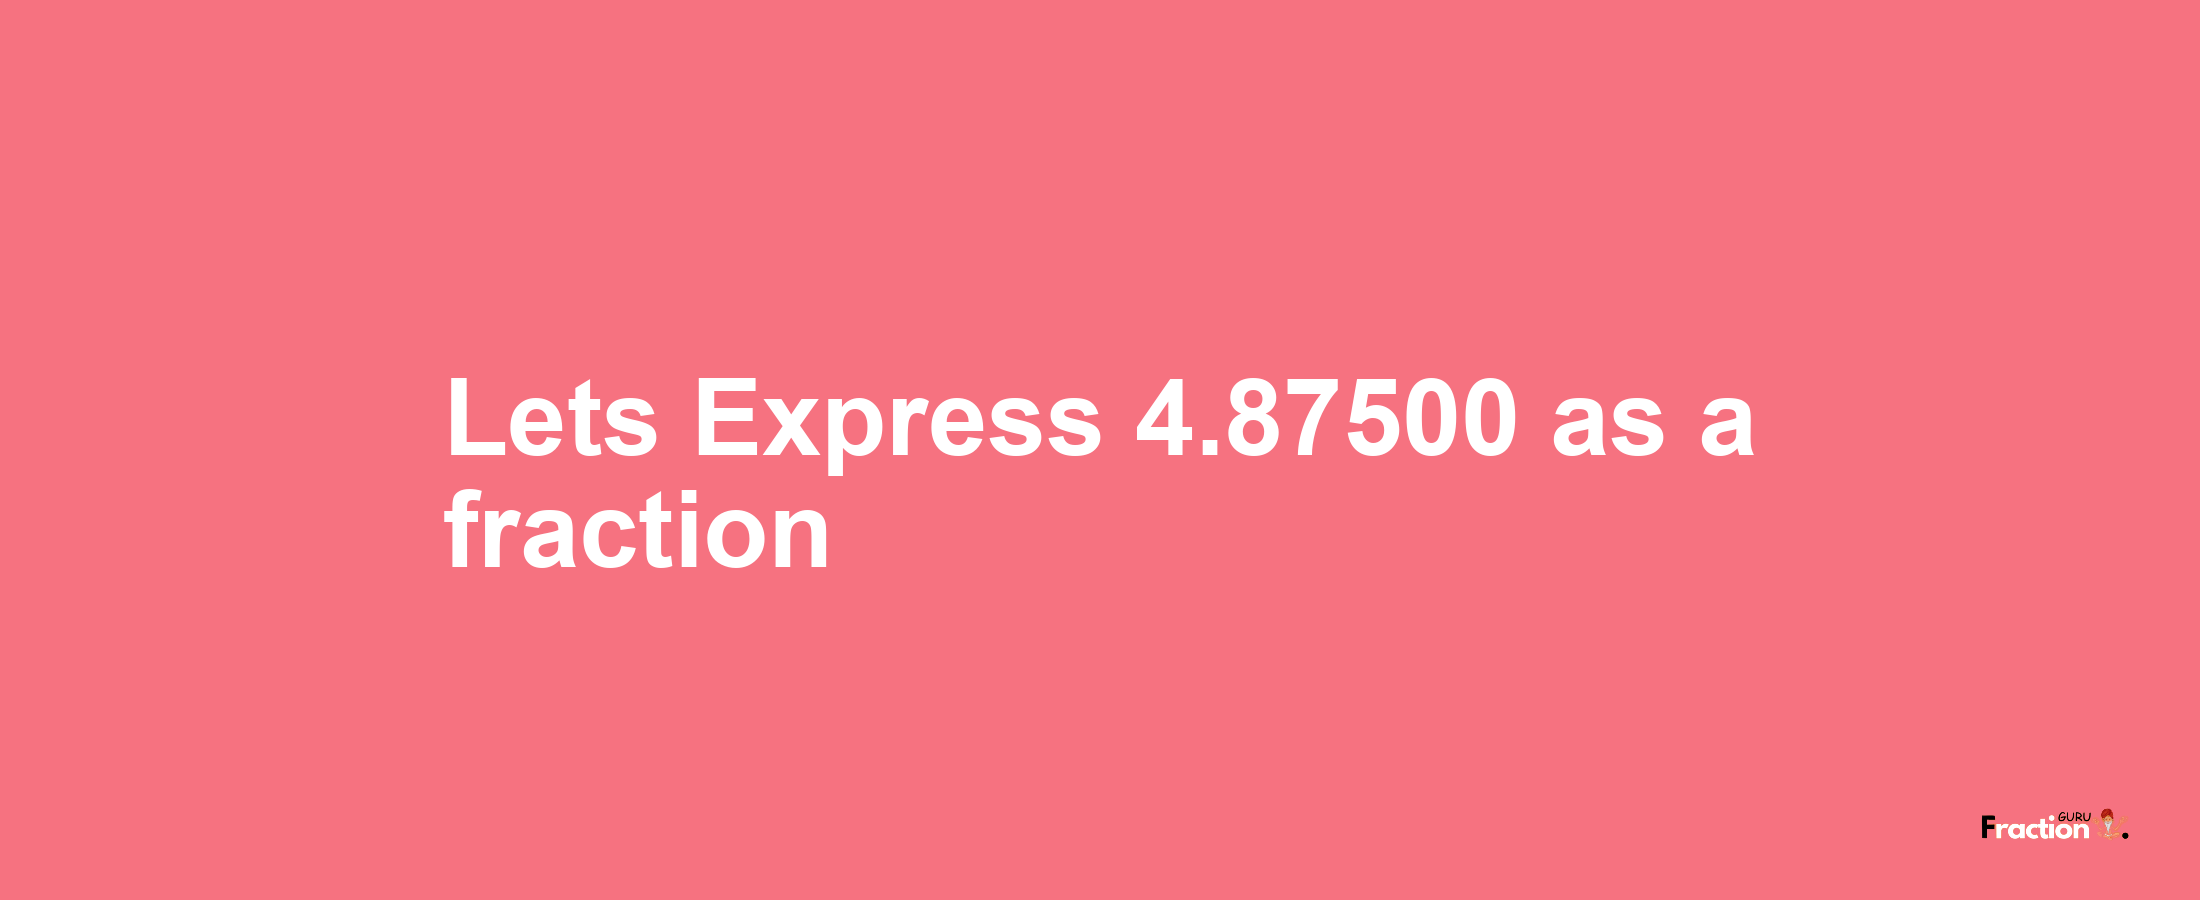 Lets Express 4.87500 as afraction